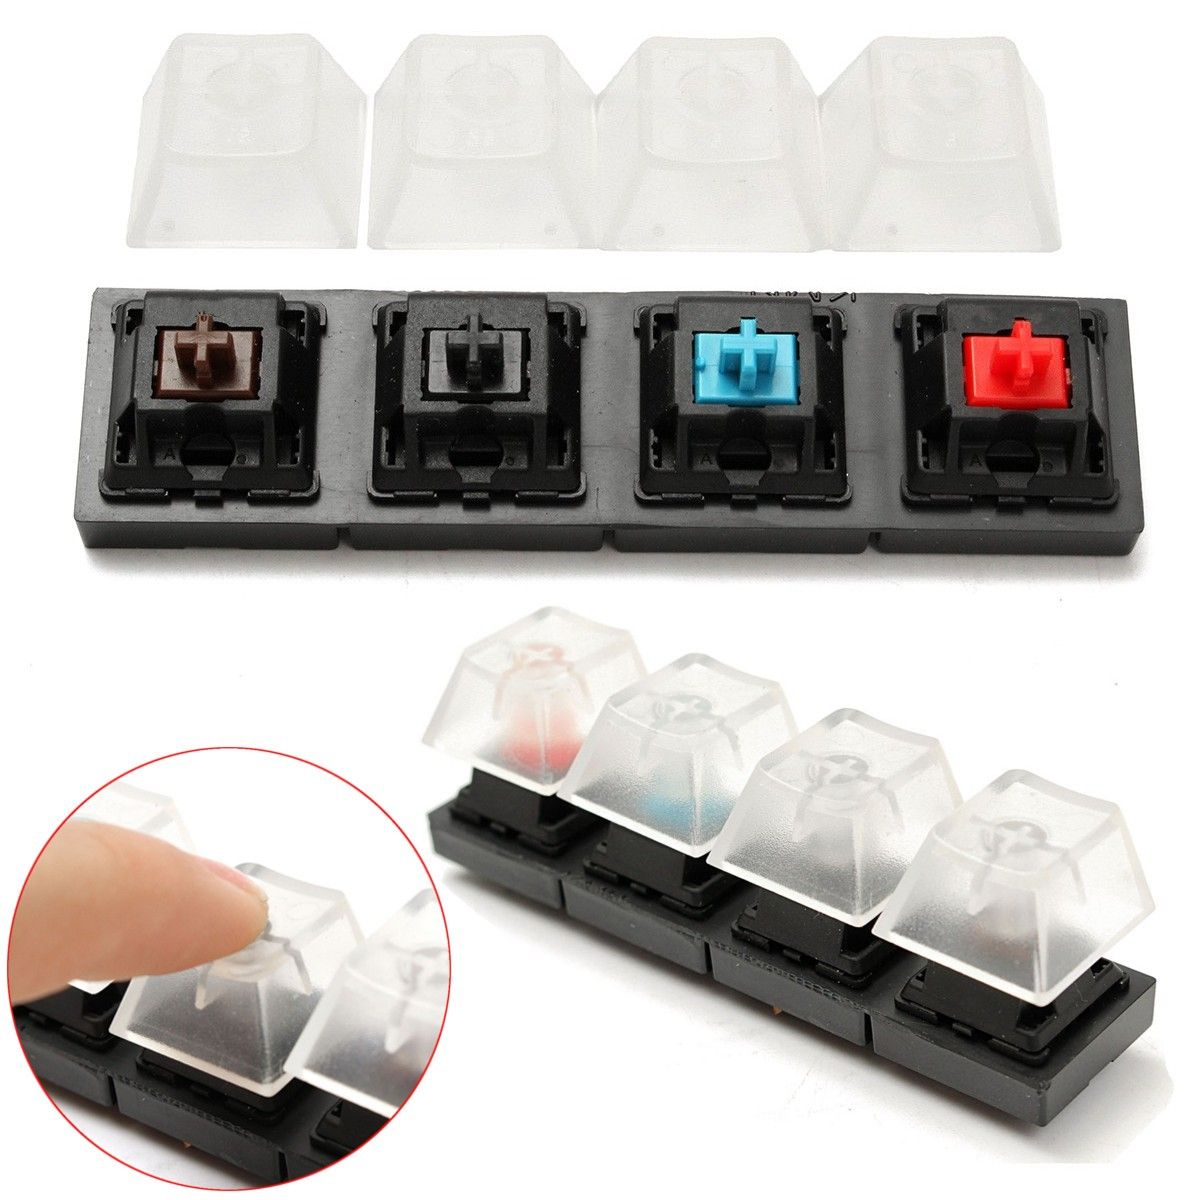 4-Clear-caps-and-4-Cherry-MX-Switch-Keycap-Sampler-Tester-Kit-1078423